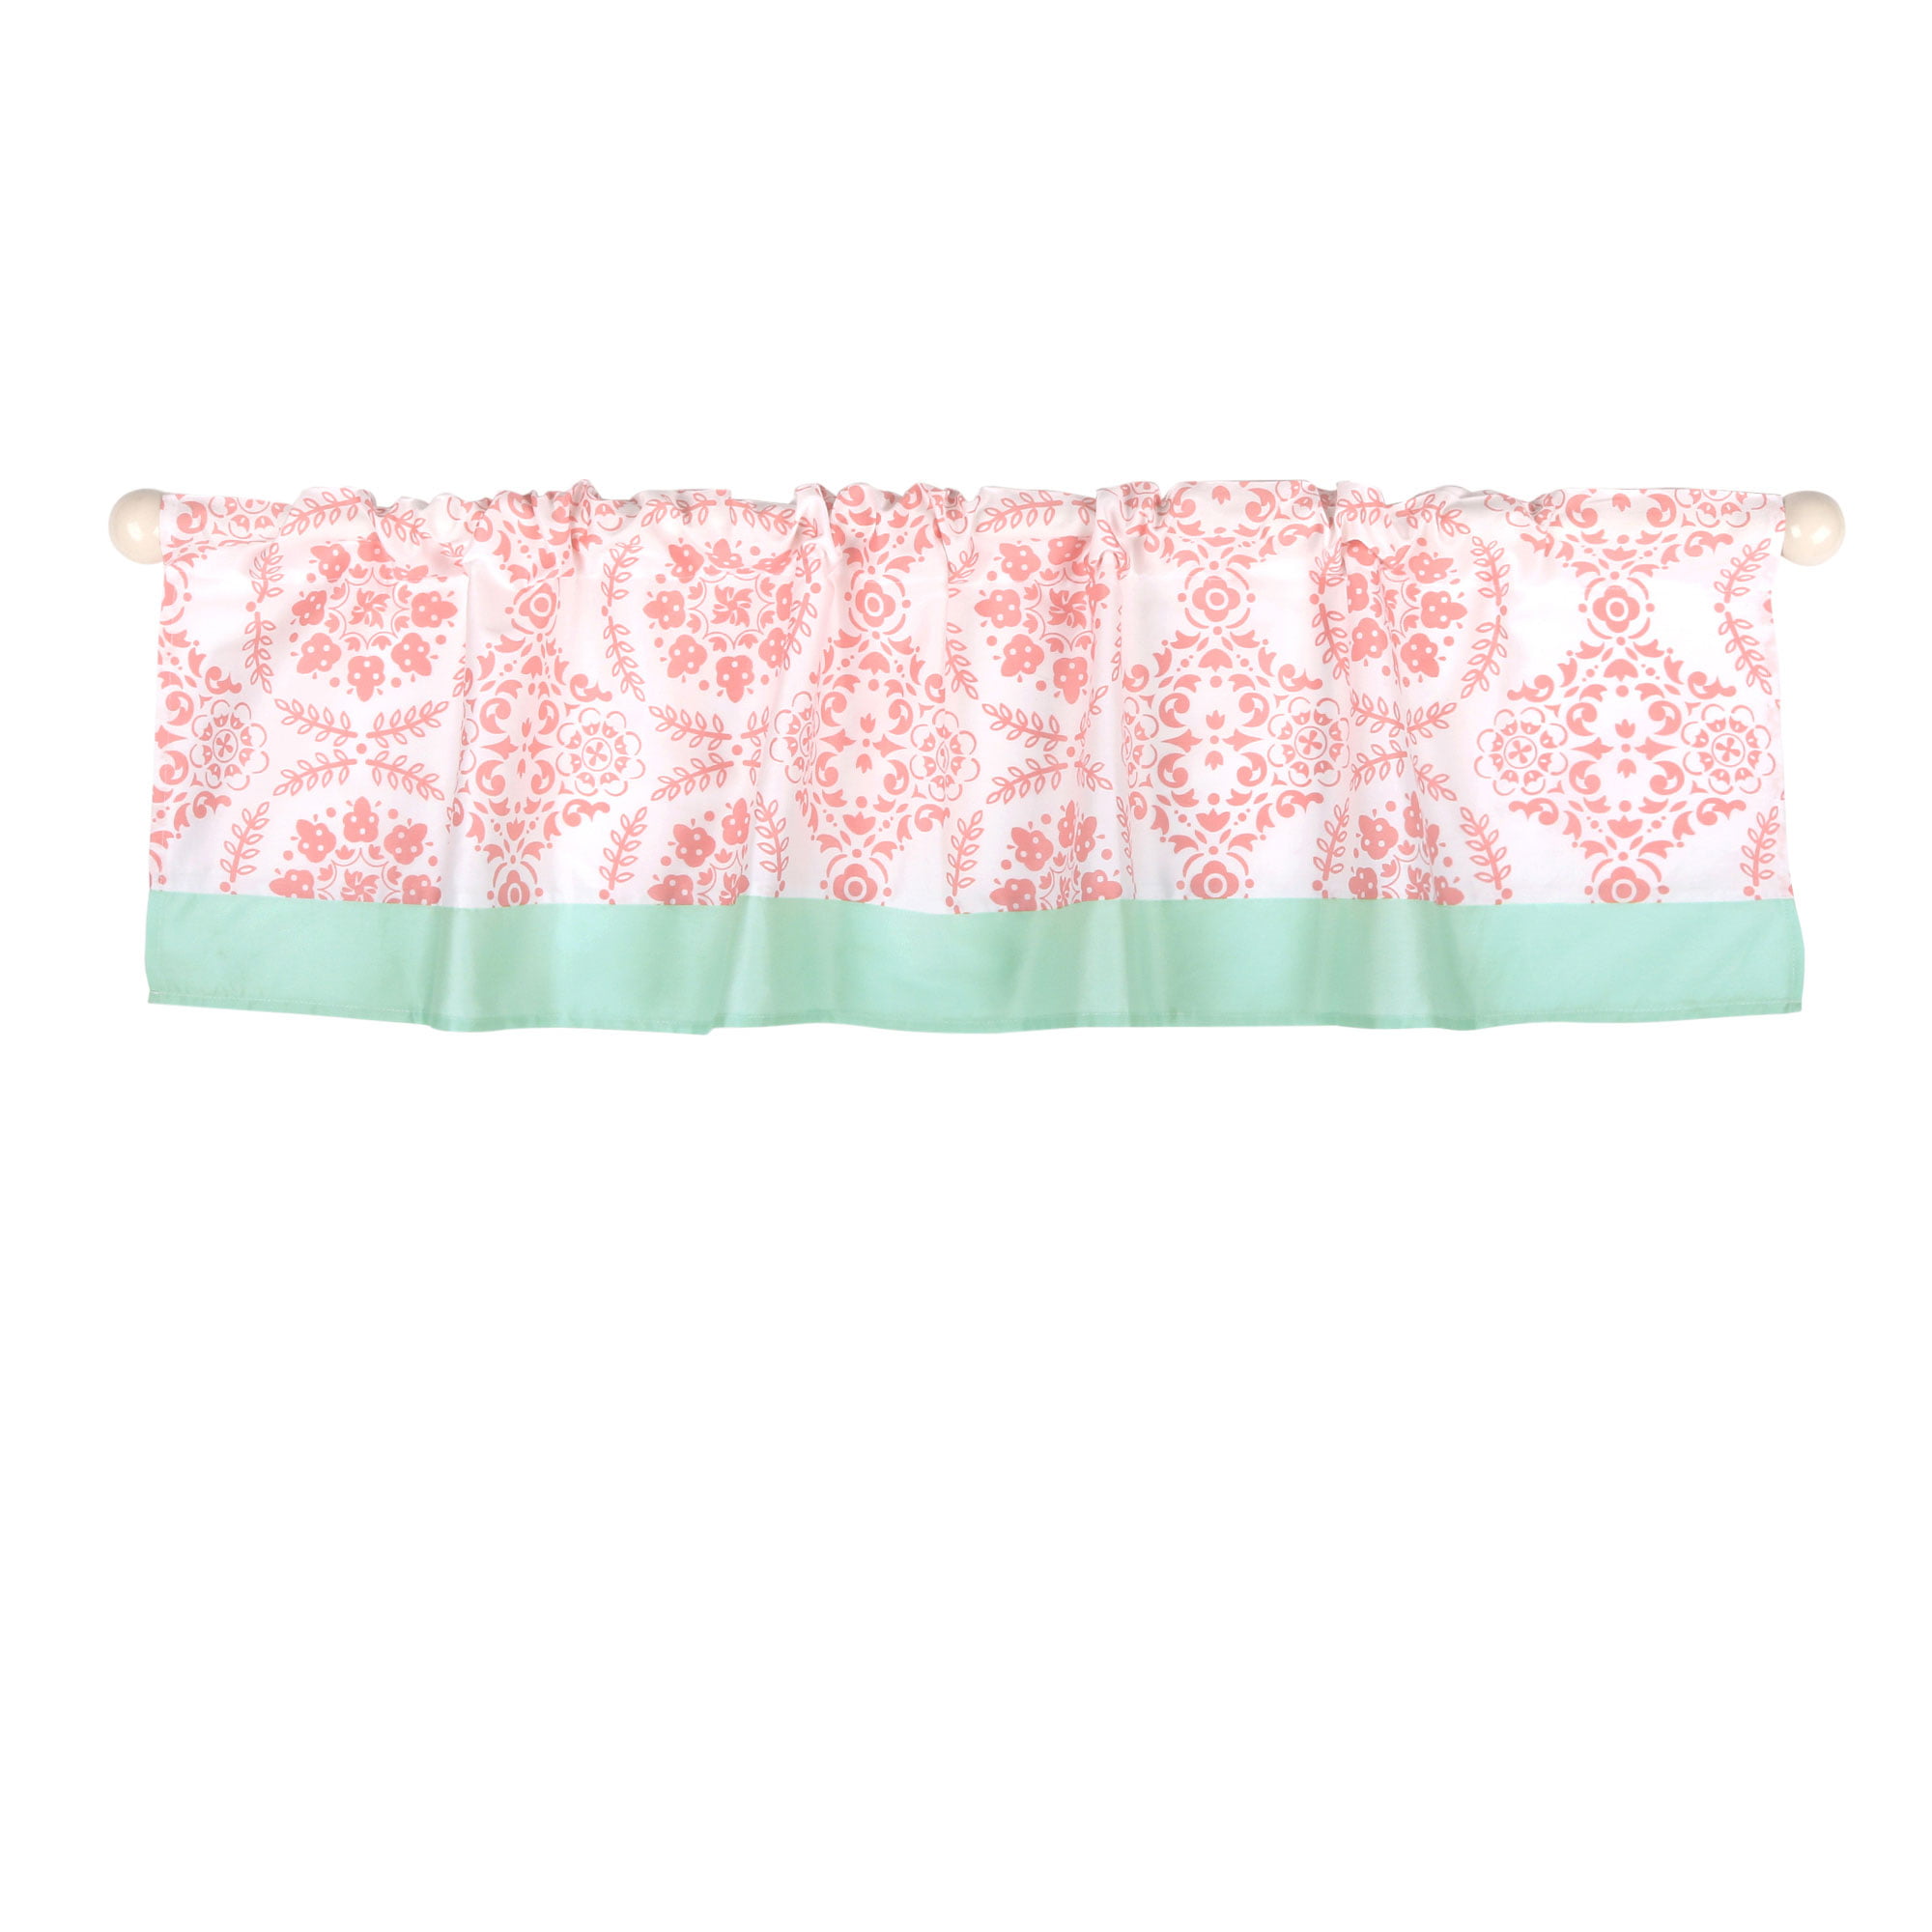 100% Cotton Sateen Coral Pink Tribal Print Window Valance by The Peanut Shell 